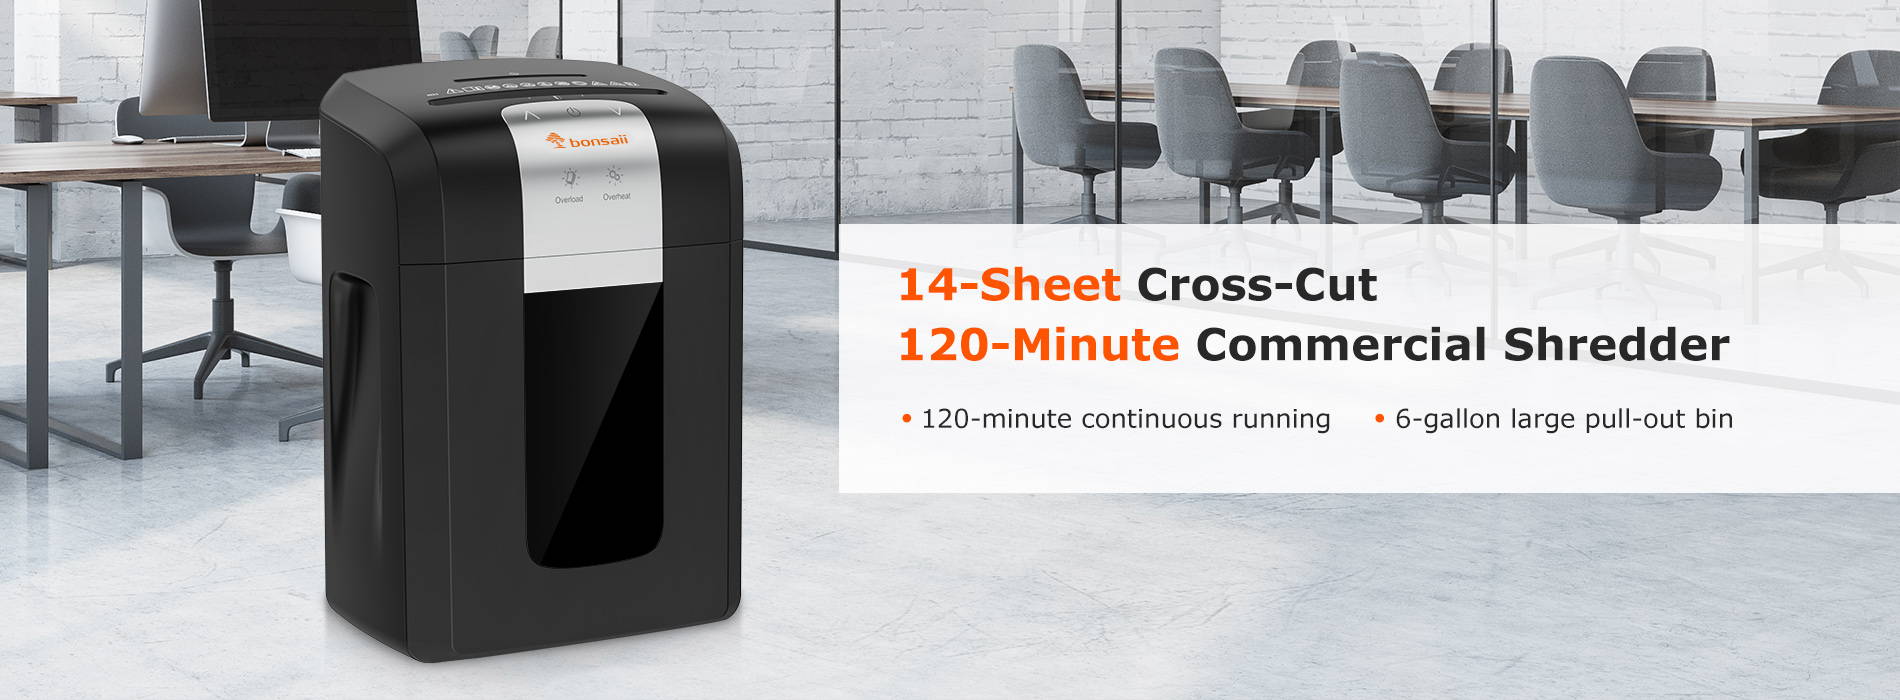 14-sheet cross-cut 120-minute commercial shredder- 120 minutes continuous running 6-gallon large pull-out bin